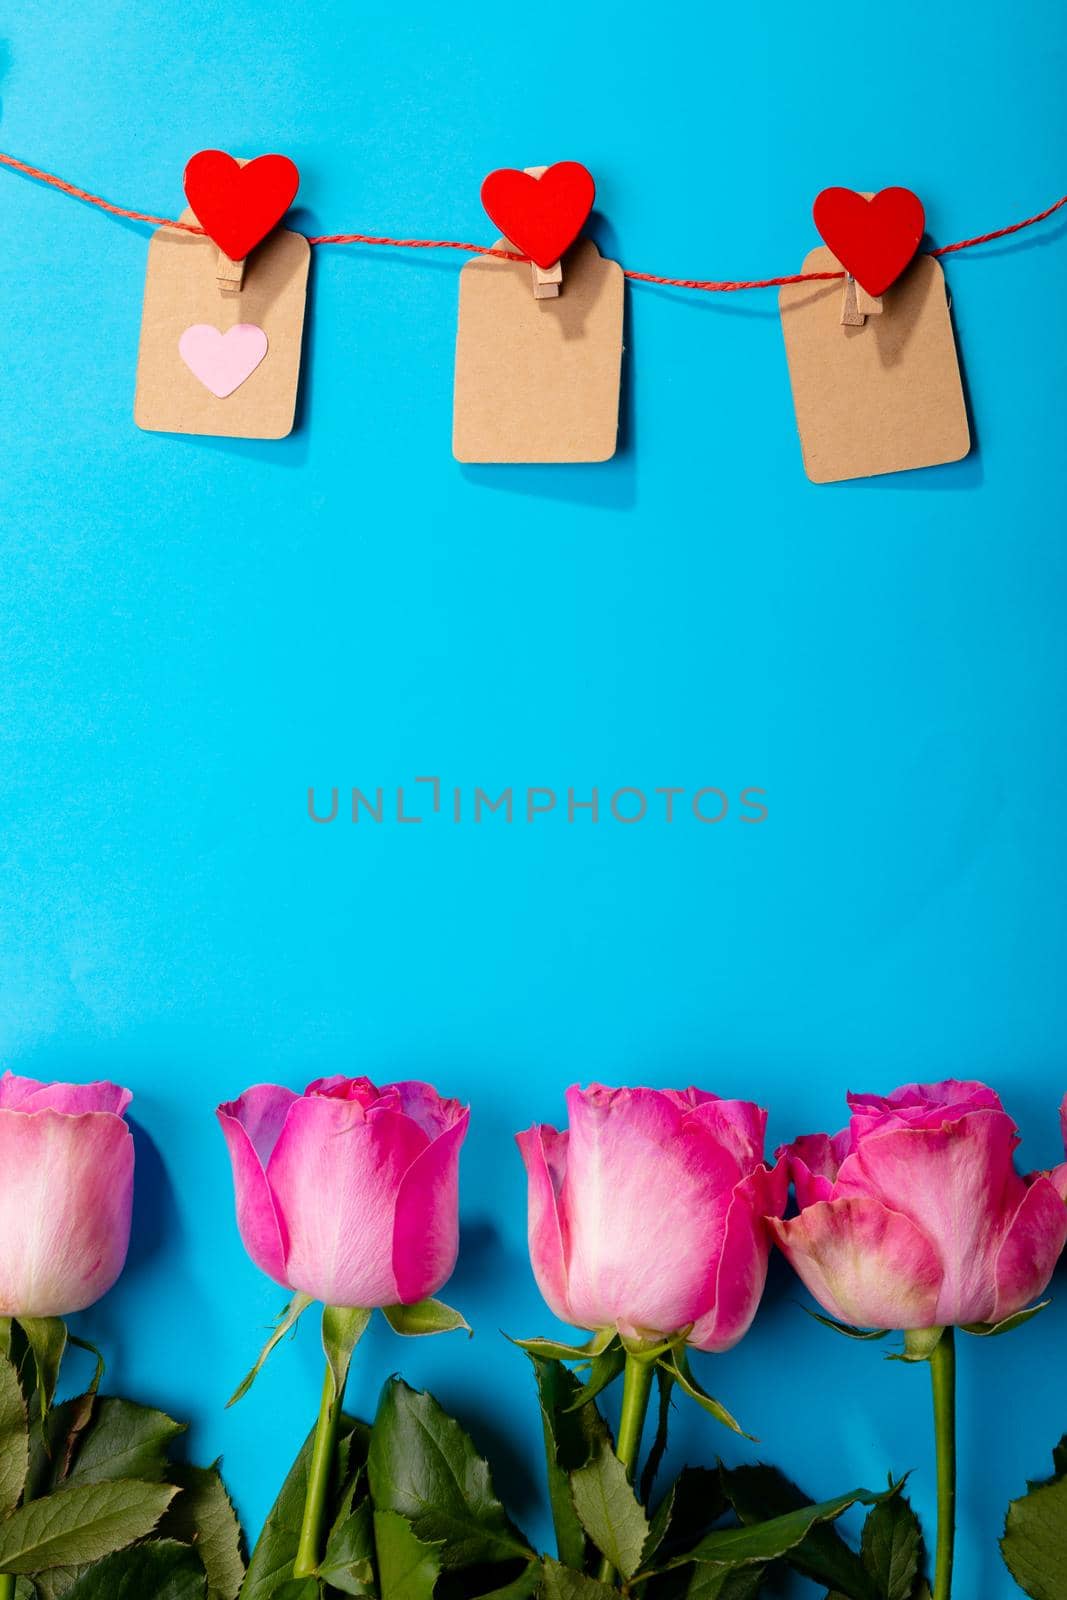 Red heart shapes on clothespins hanging from clothesline over pink roses against blue background by Wavebreakmedia